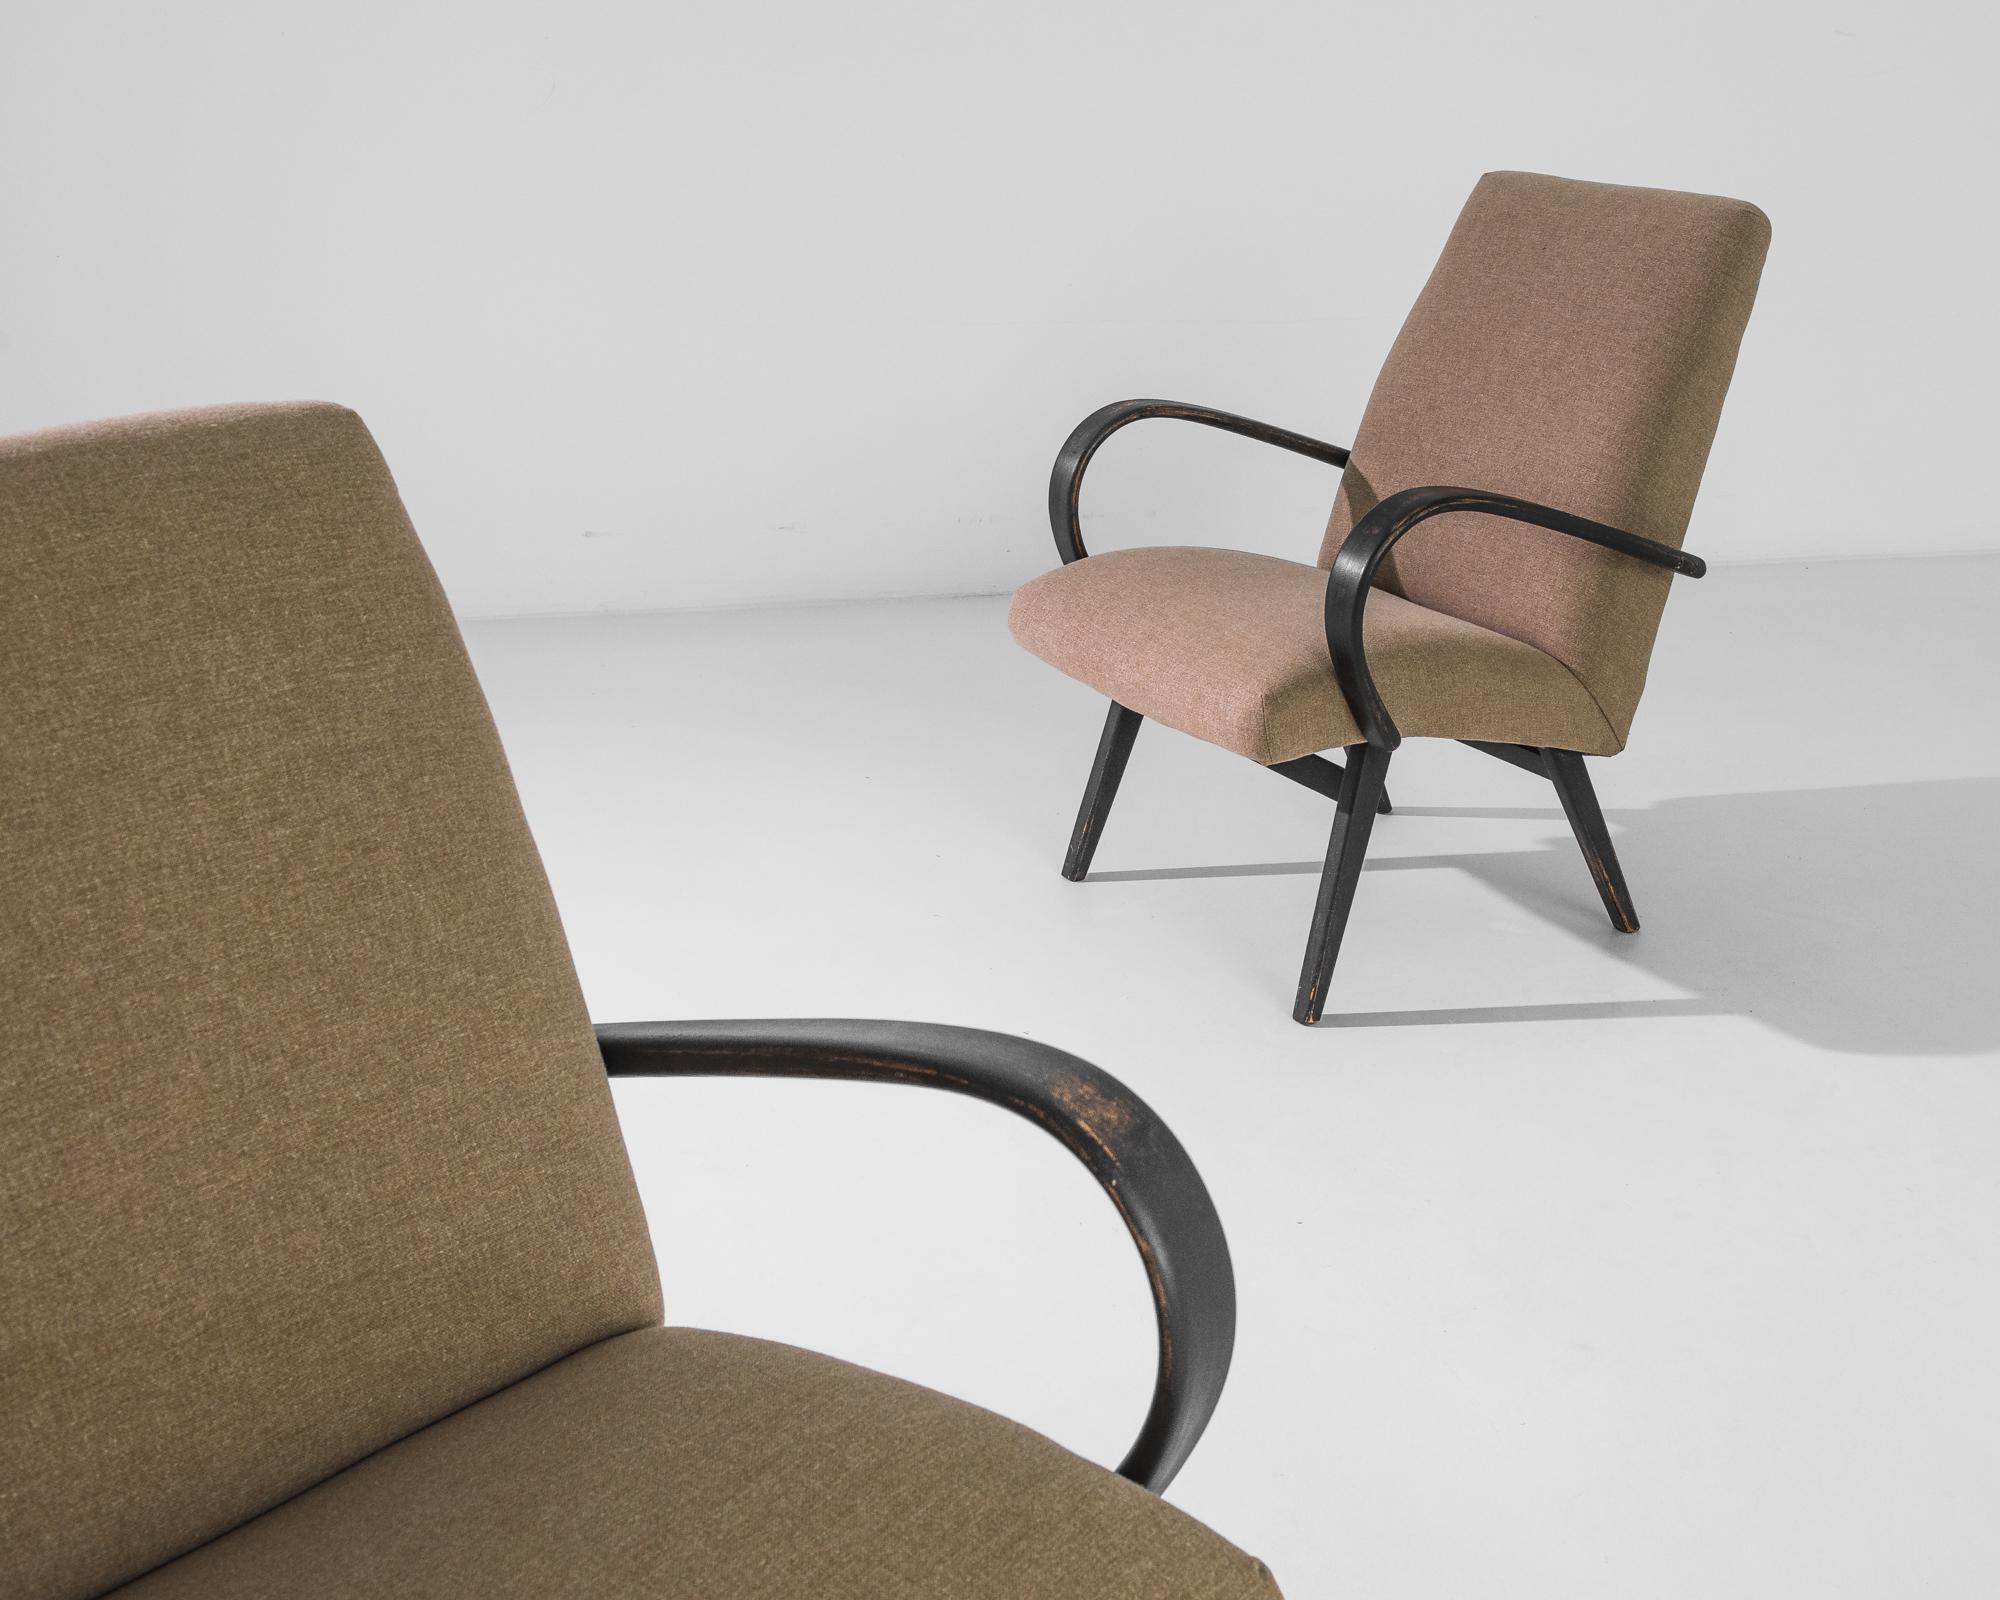 A pair of armchairs by Czech furniture designer Jindrich Halabala. This 1950s design is upholstered in an updated brown fabric, the soothing earth tone was chosen to compliment the textured black of the hardwood frame. Influenced by Modern and Art